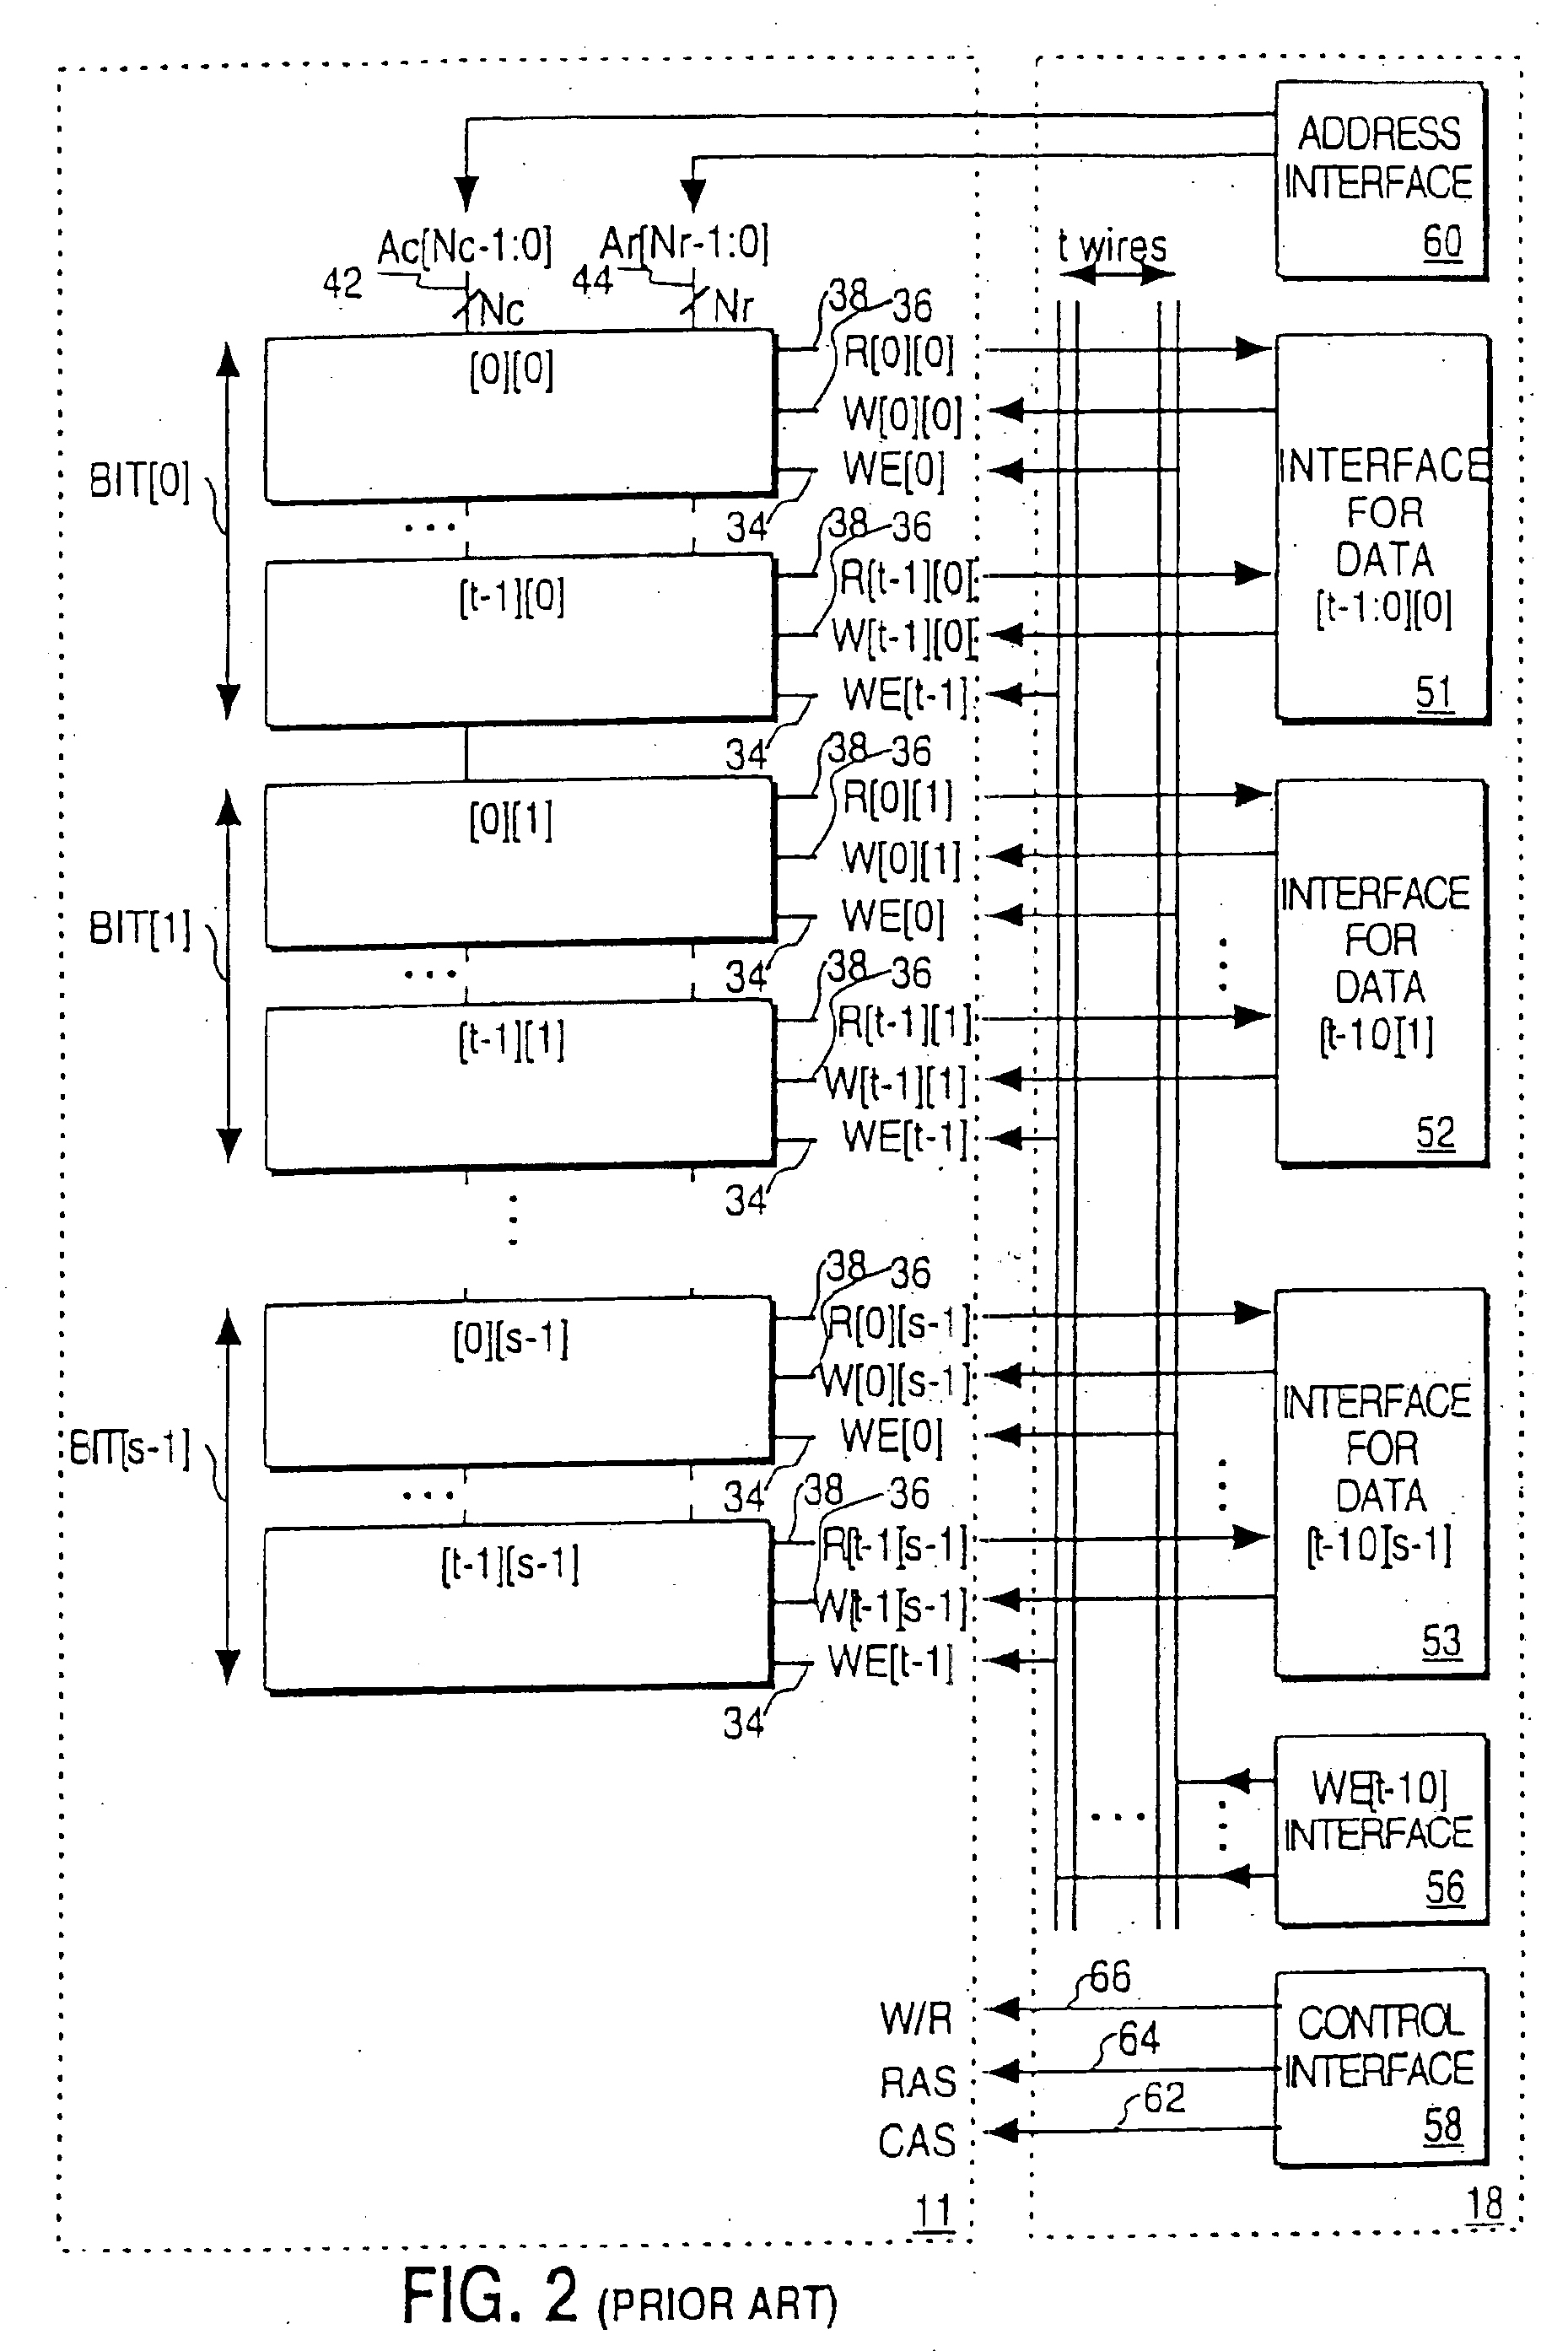 Memory device which receives write masking information